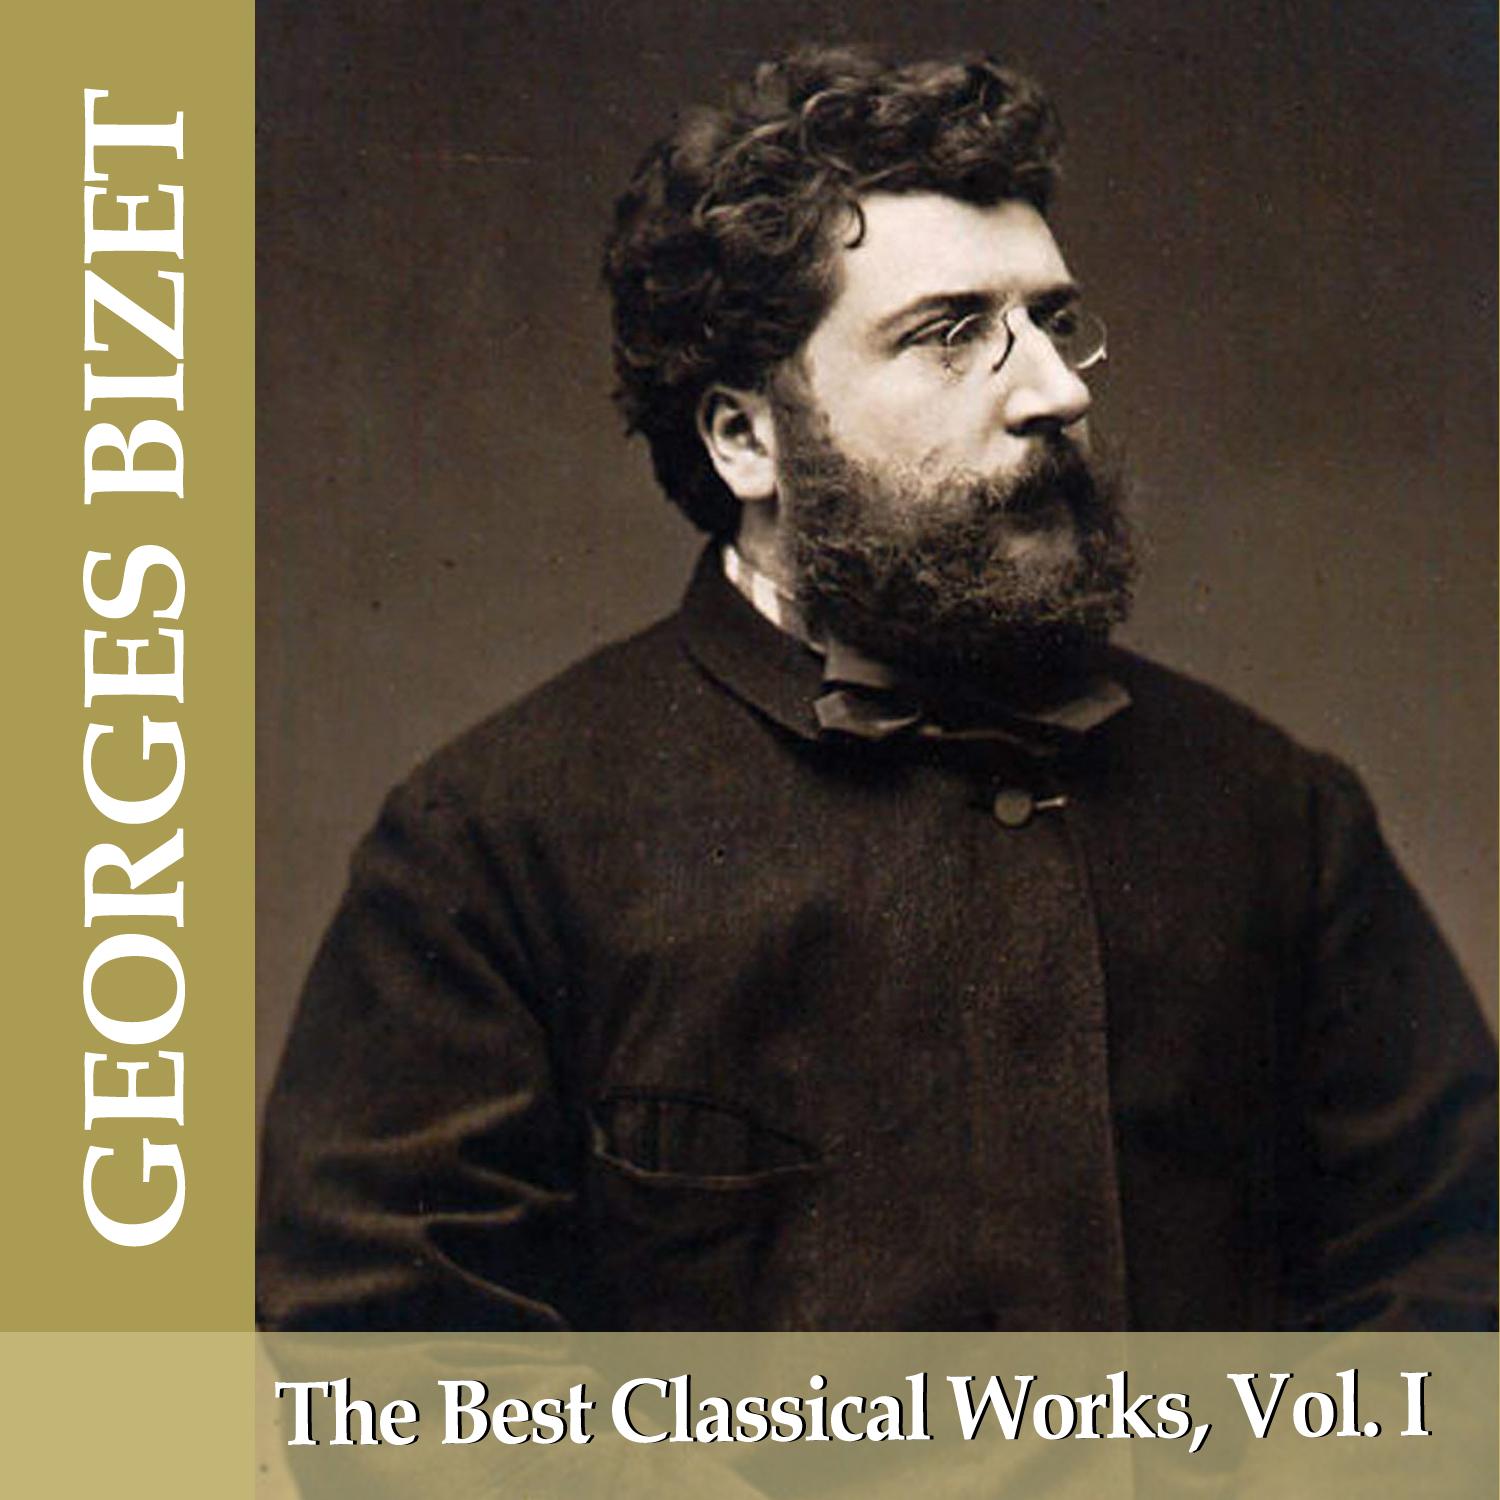 Georges Bizet: The Best Classical Works, Vol. I